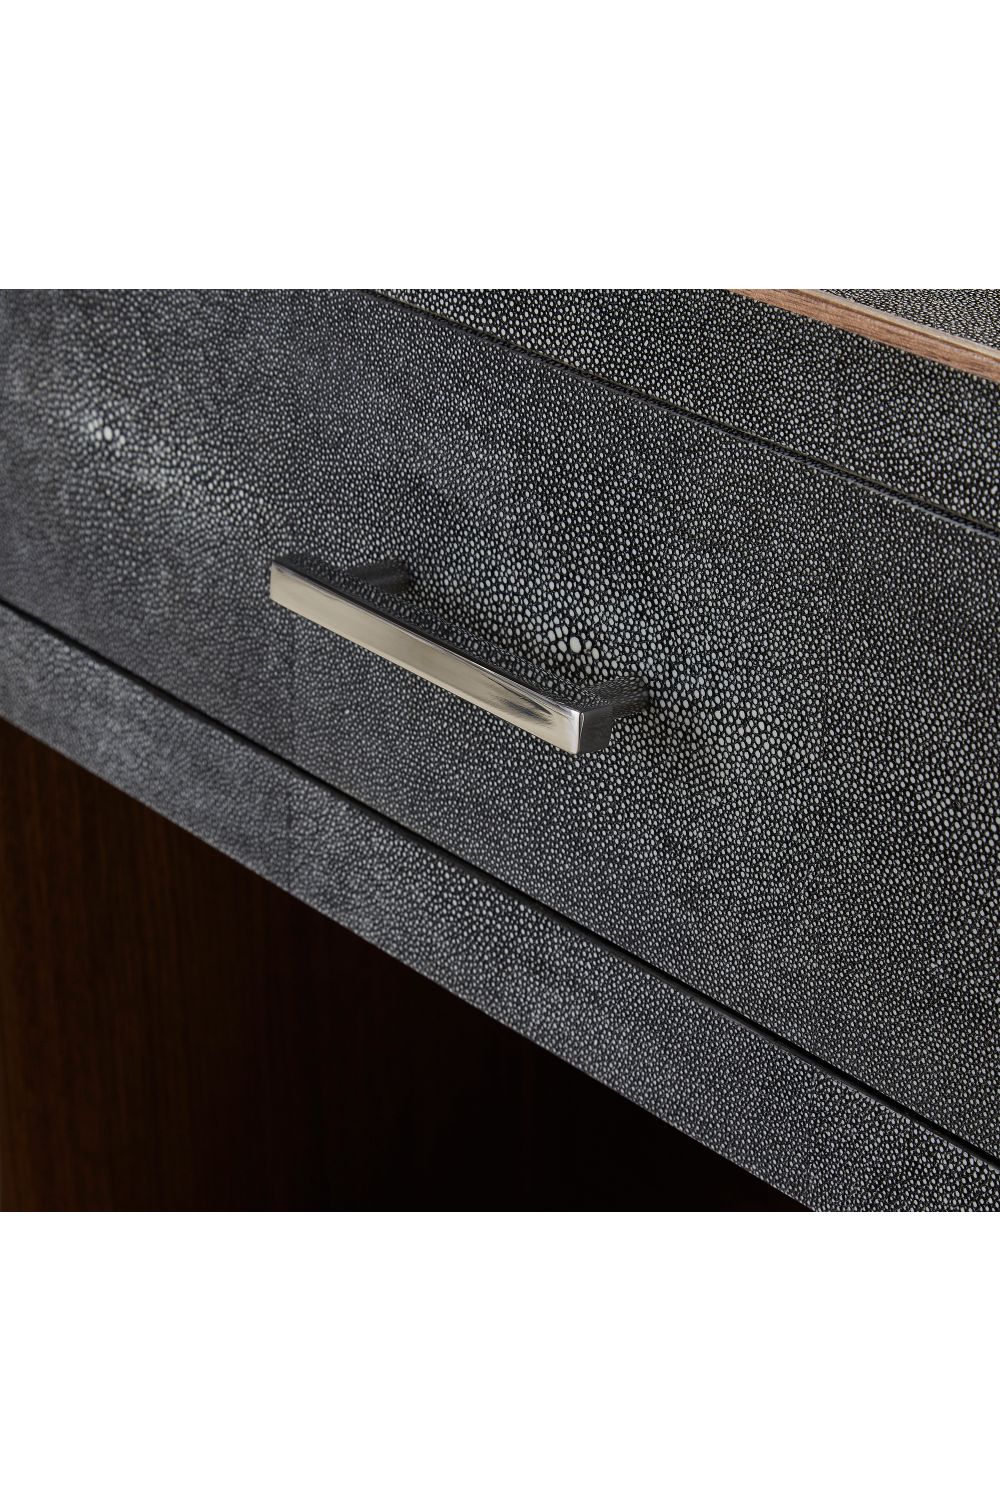 Gray Shagreen with Drawer Bedside Table | Andrew Martin Fitz | OROA